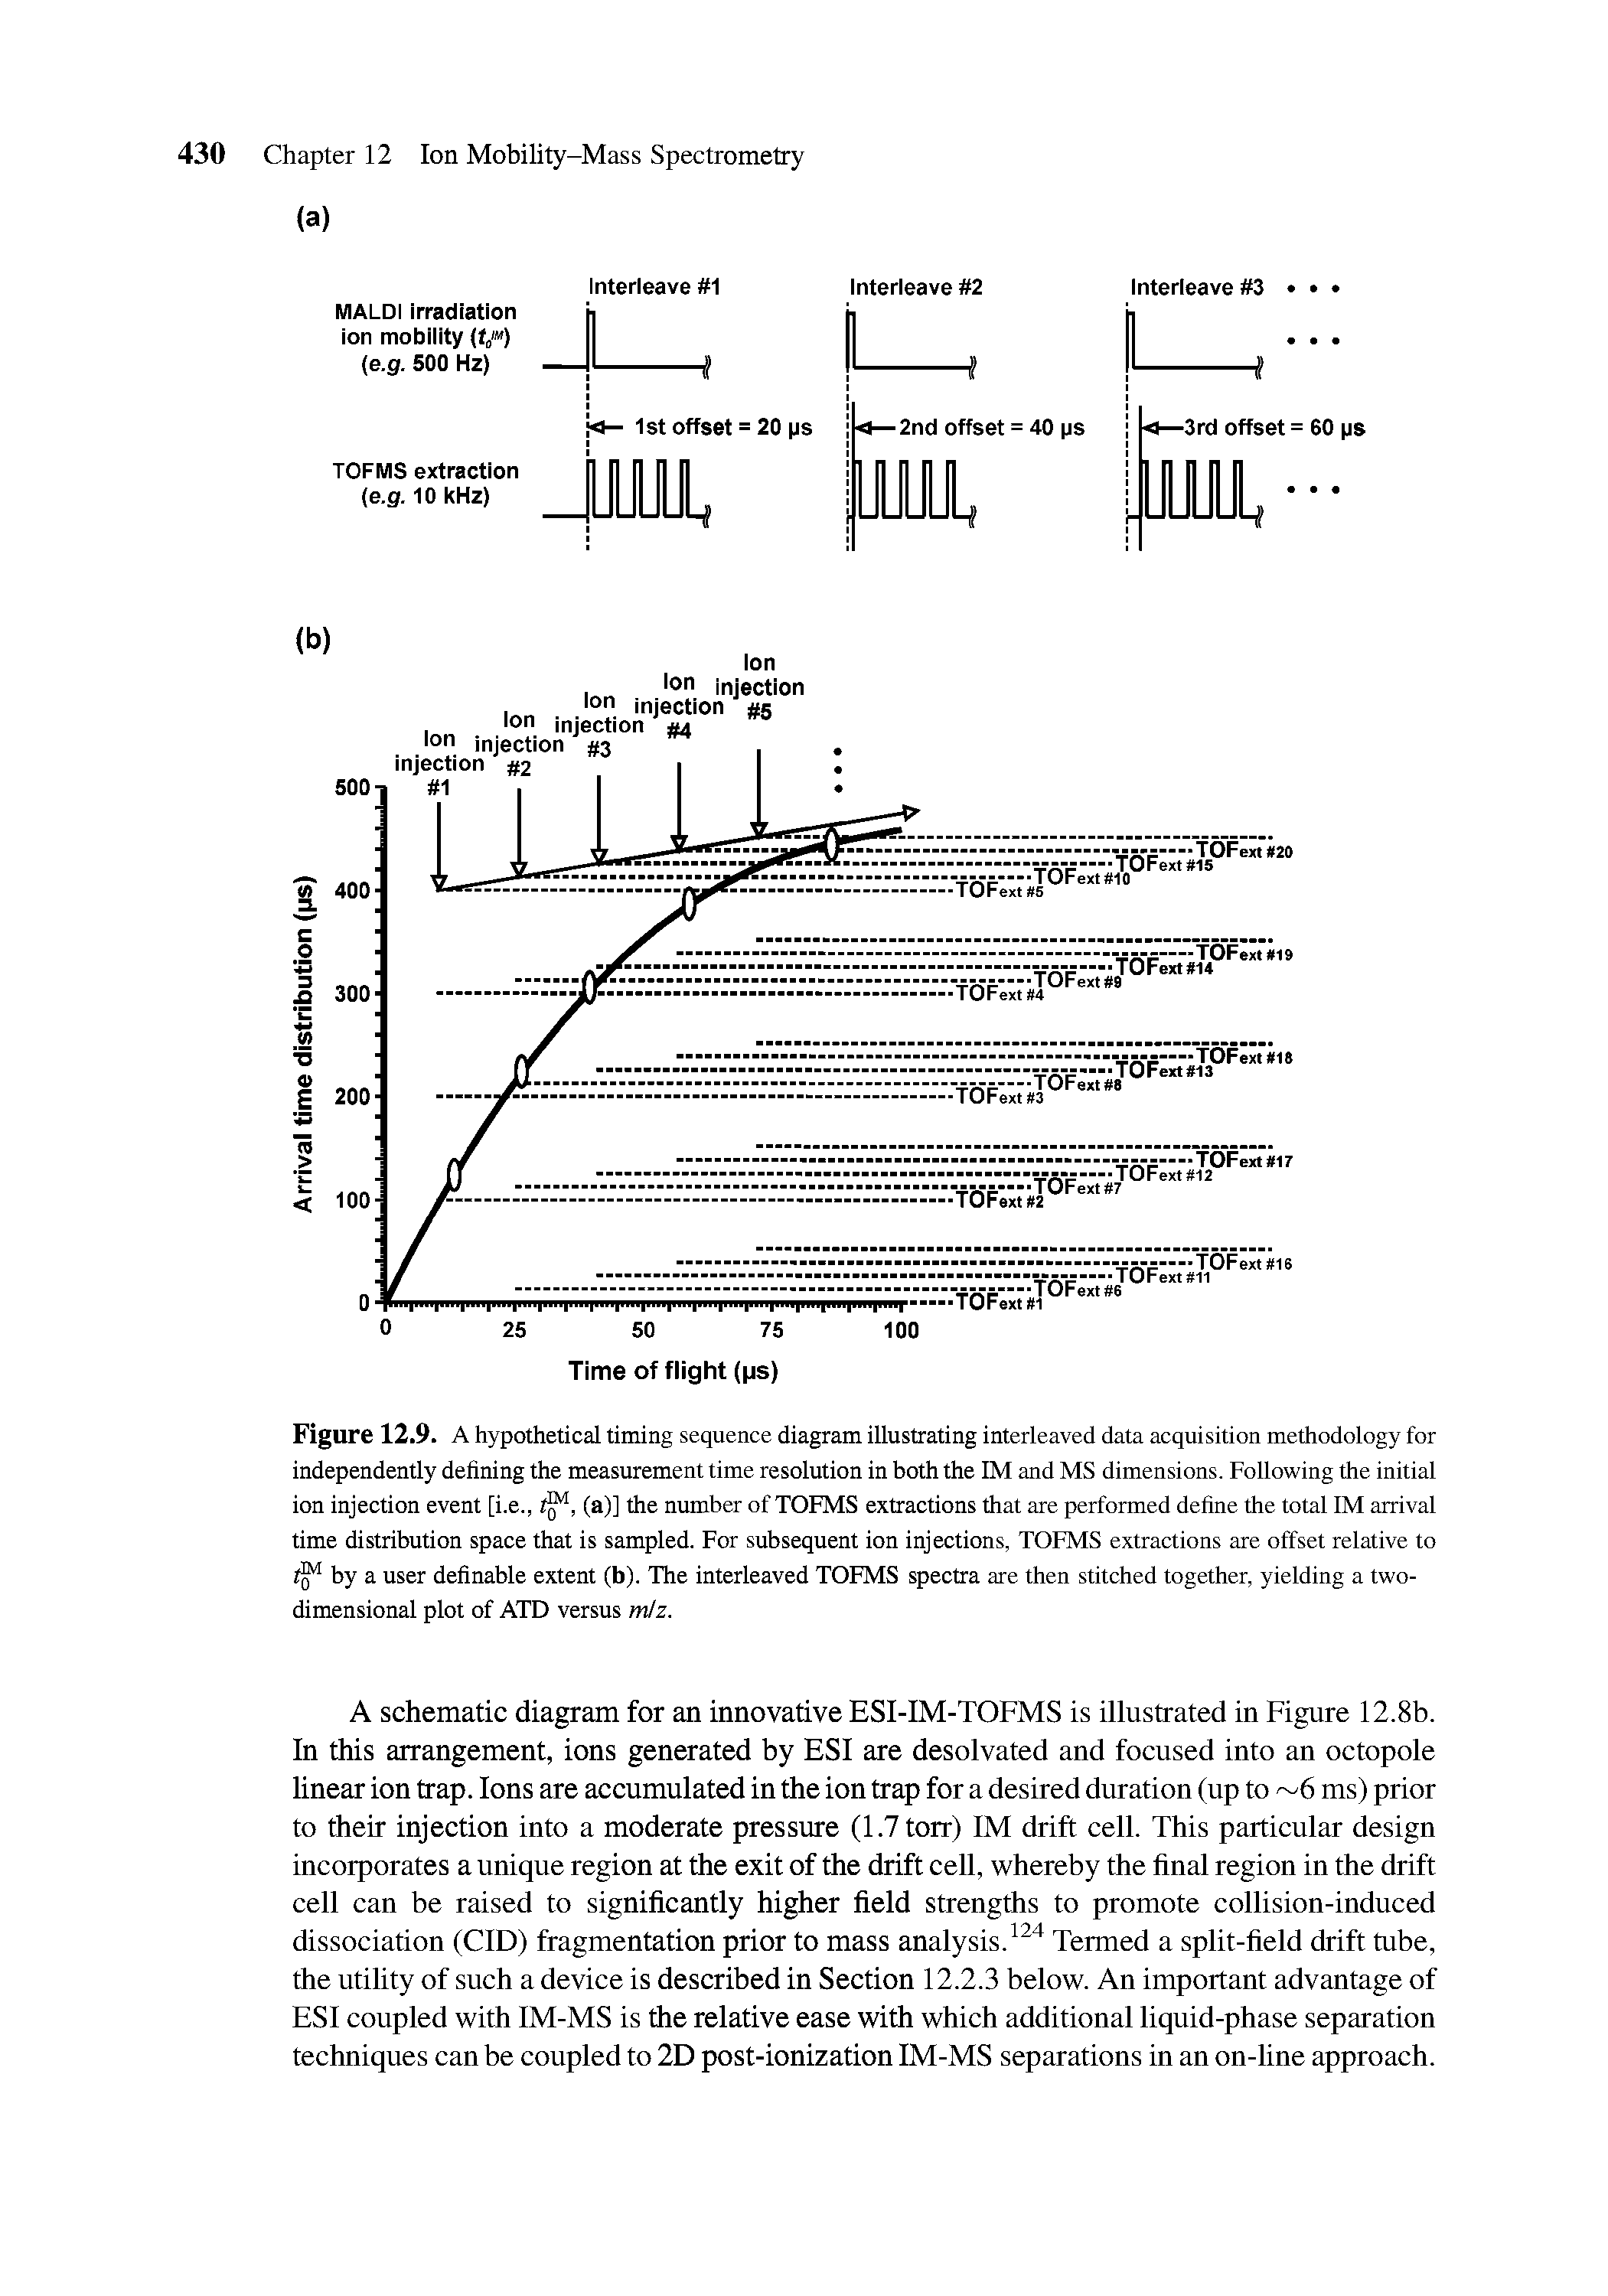 Figure 12.9. A hypothetical timing sequence diagram illustrating interleaved data acquisition methodology for independently defining the measurement time resolution in both the IM and MS dimensions. Following the initial ion injection event [i.e., (a)] the number of TOFMS extractions that are performed define the total IM arrival...